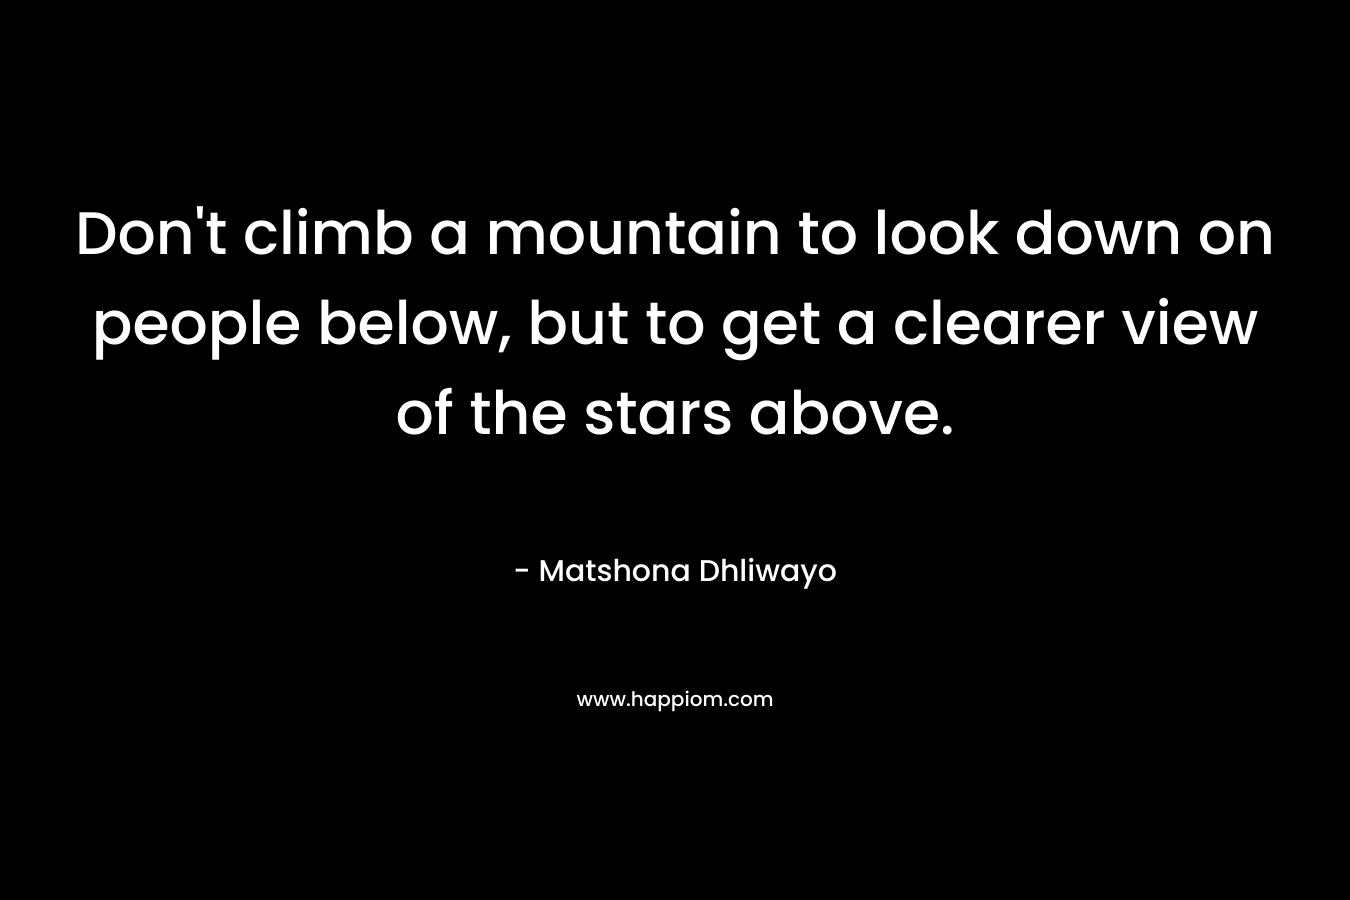 Don't climb a mountain to look down on people below, but to get a clearer view of the stars above.